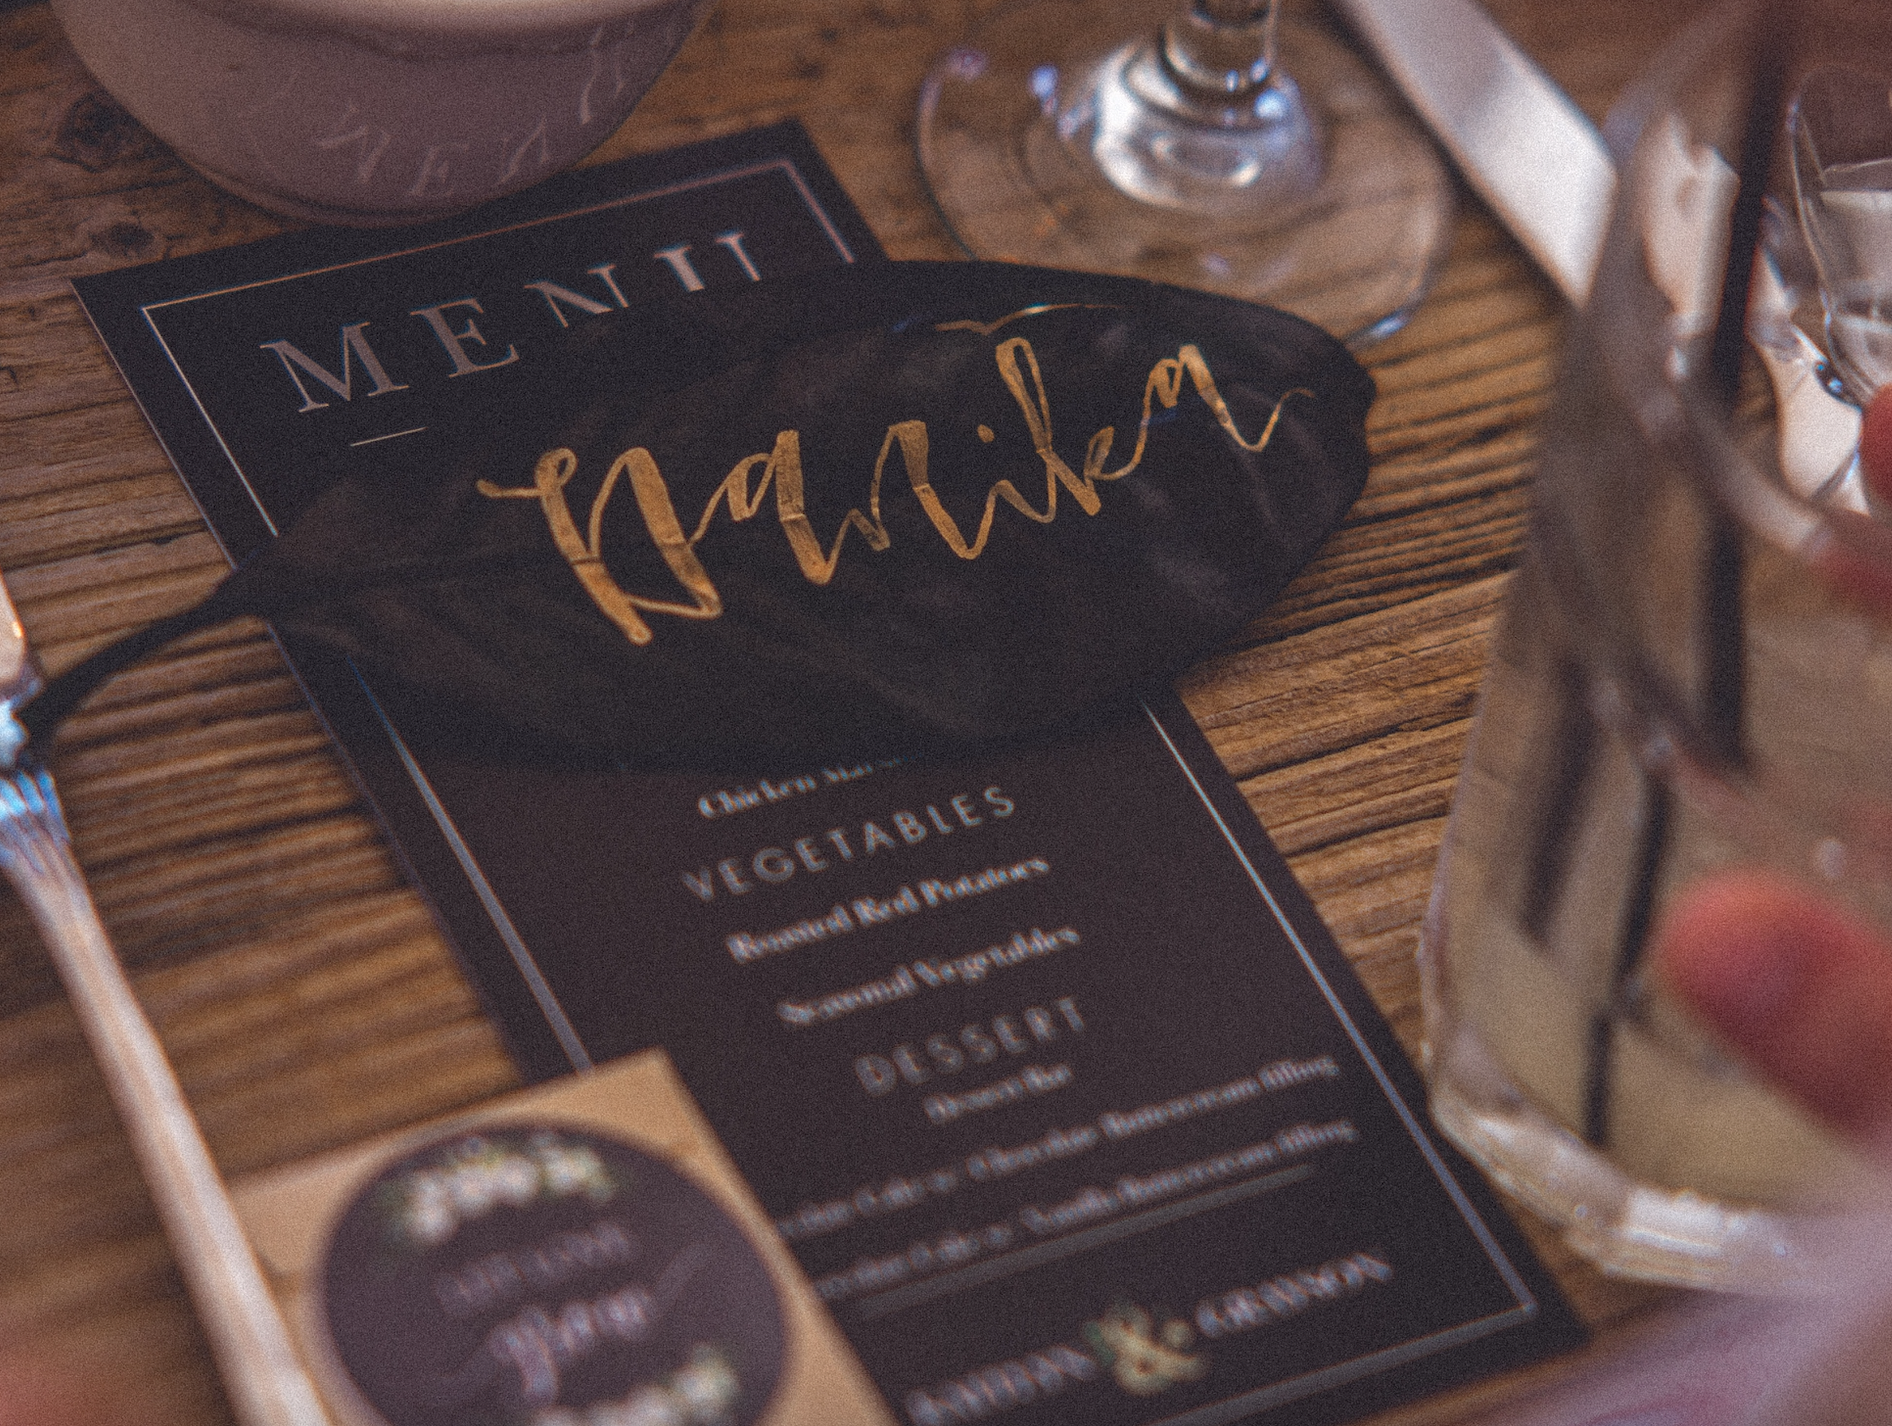 a look at some of the most common menu design mistakes.